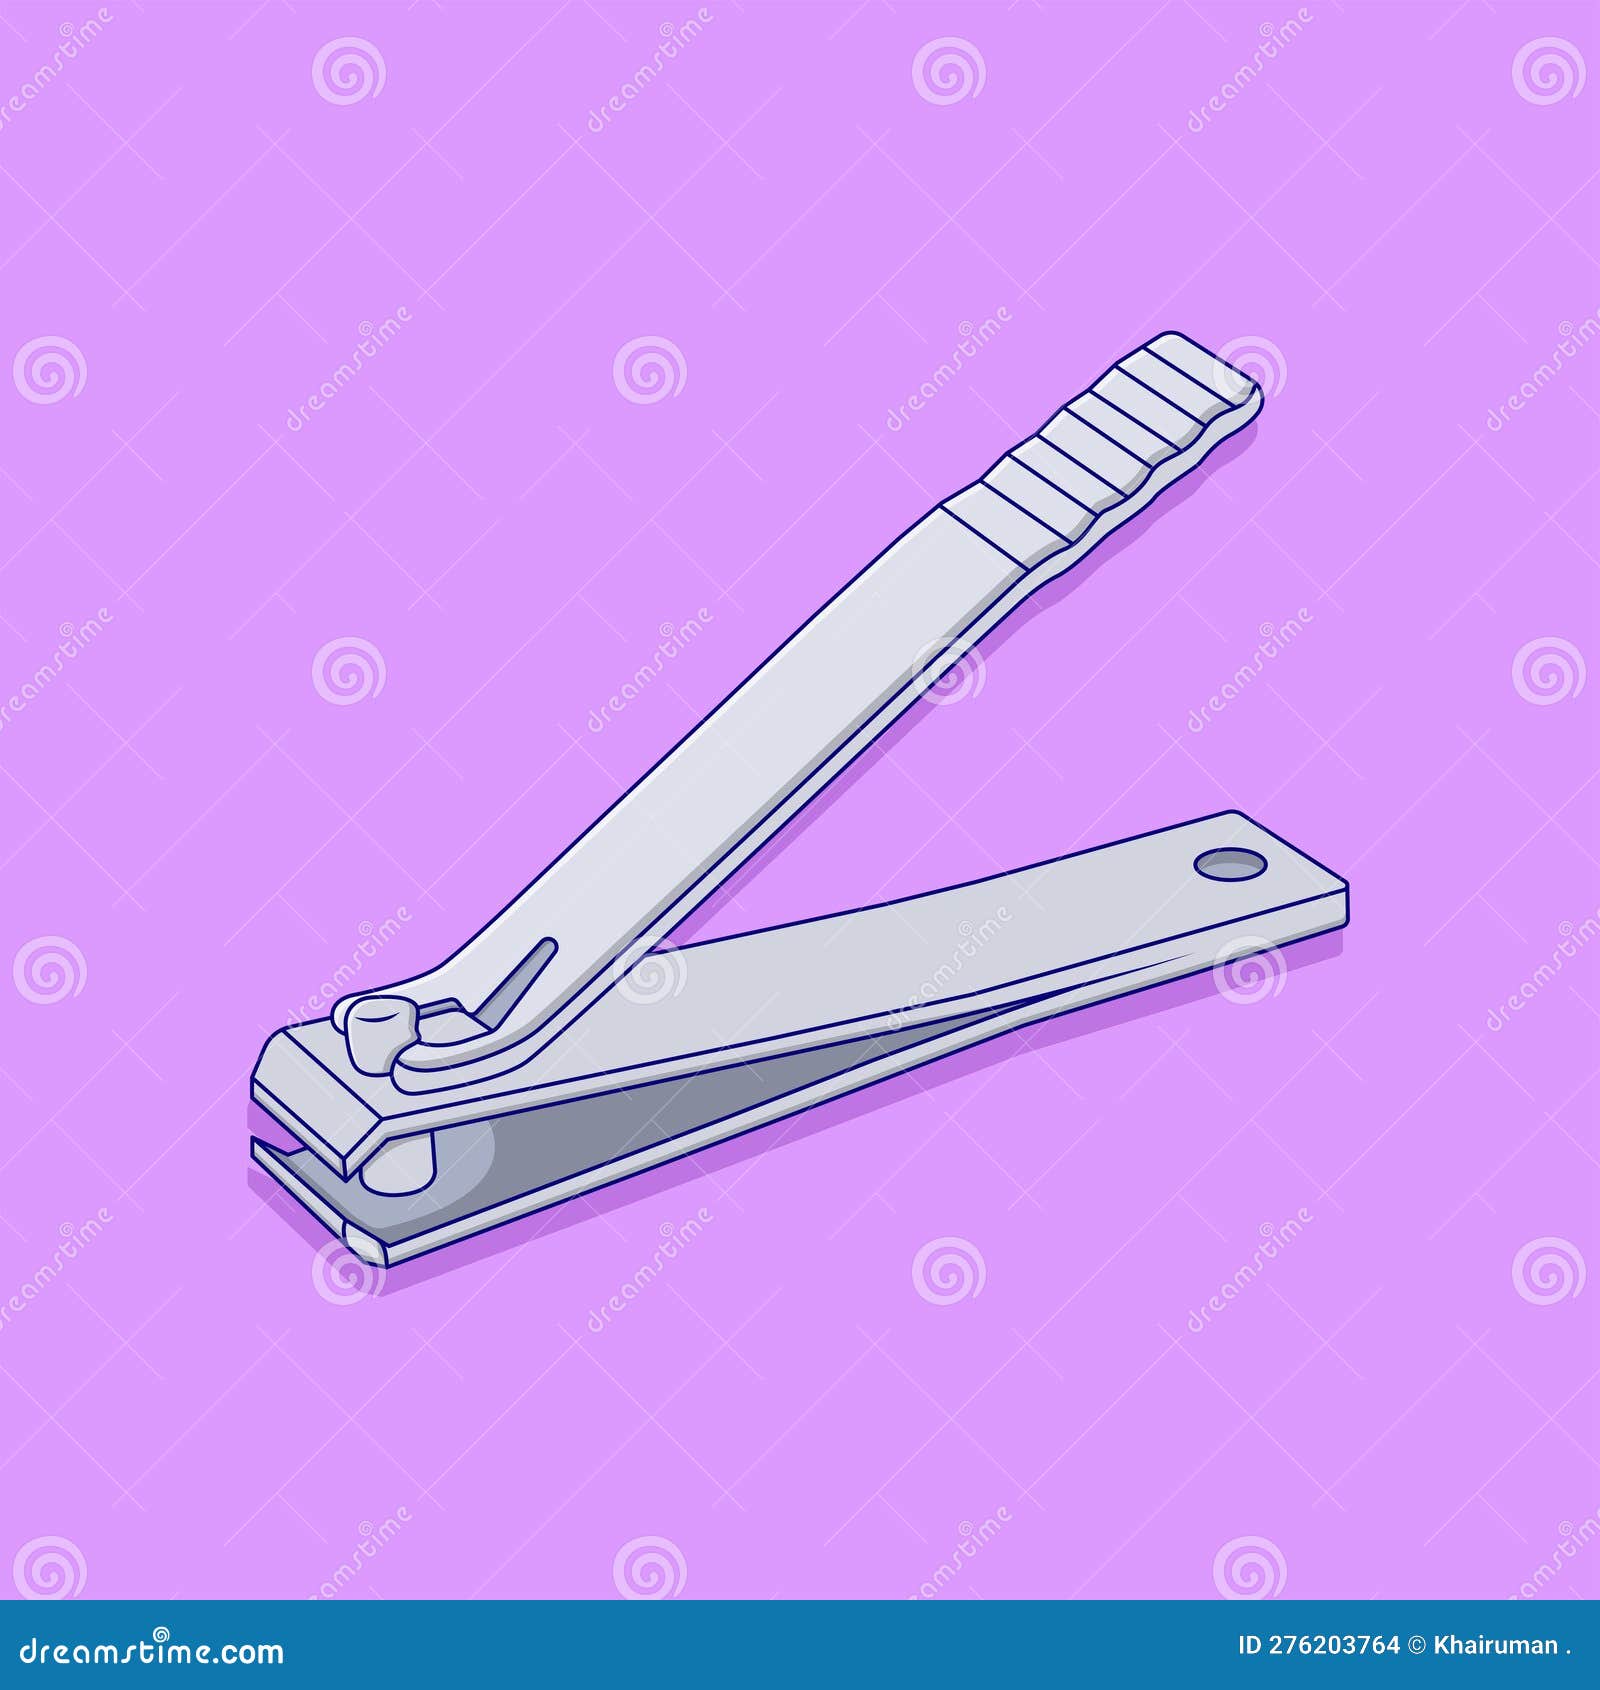 Nail clipper Dinosoft Lineal Color icon